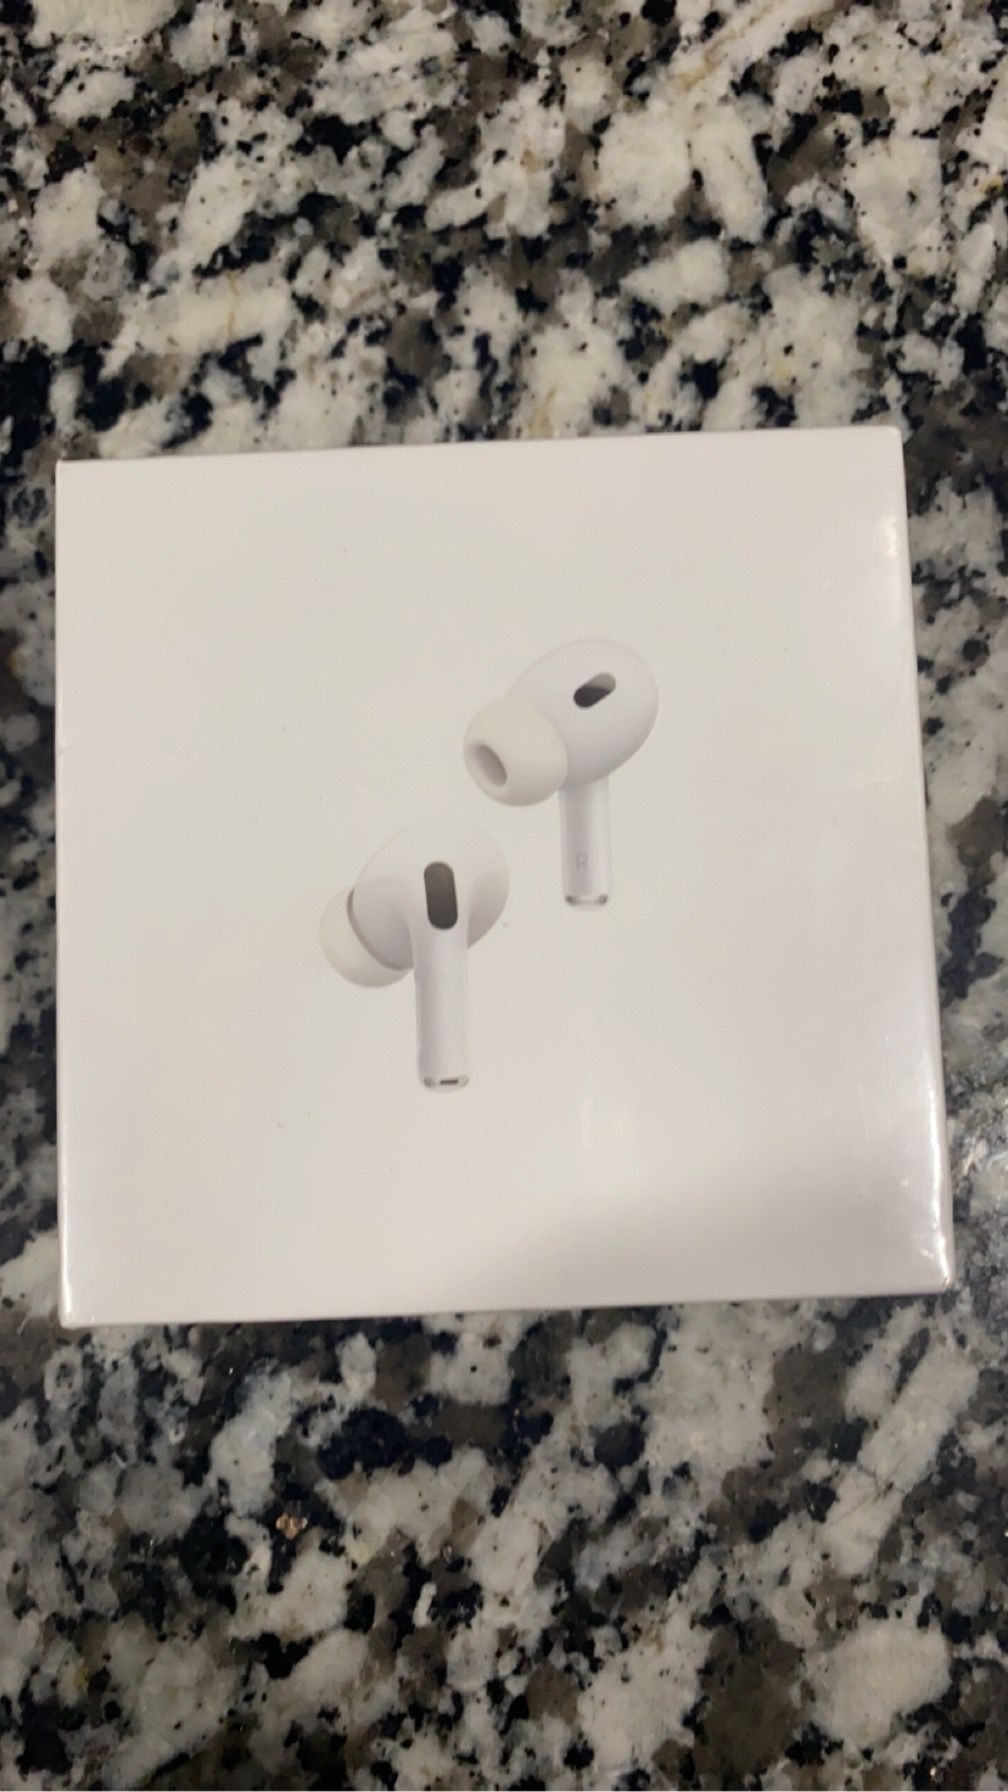 *BEST OFFER* AirPod Pros 2s brand new